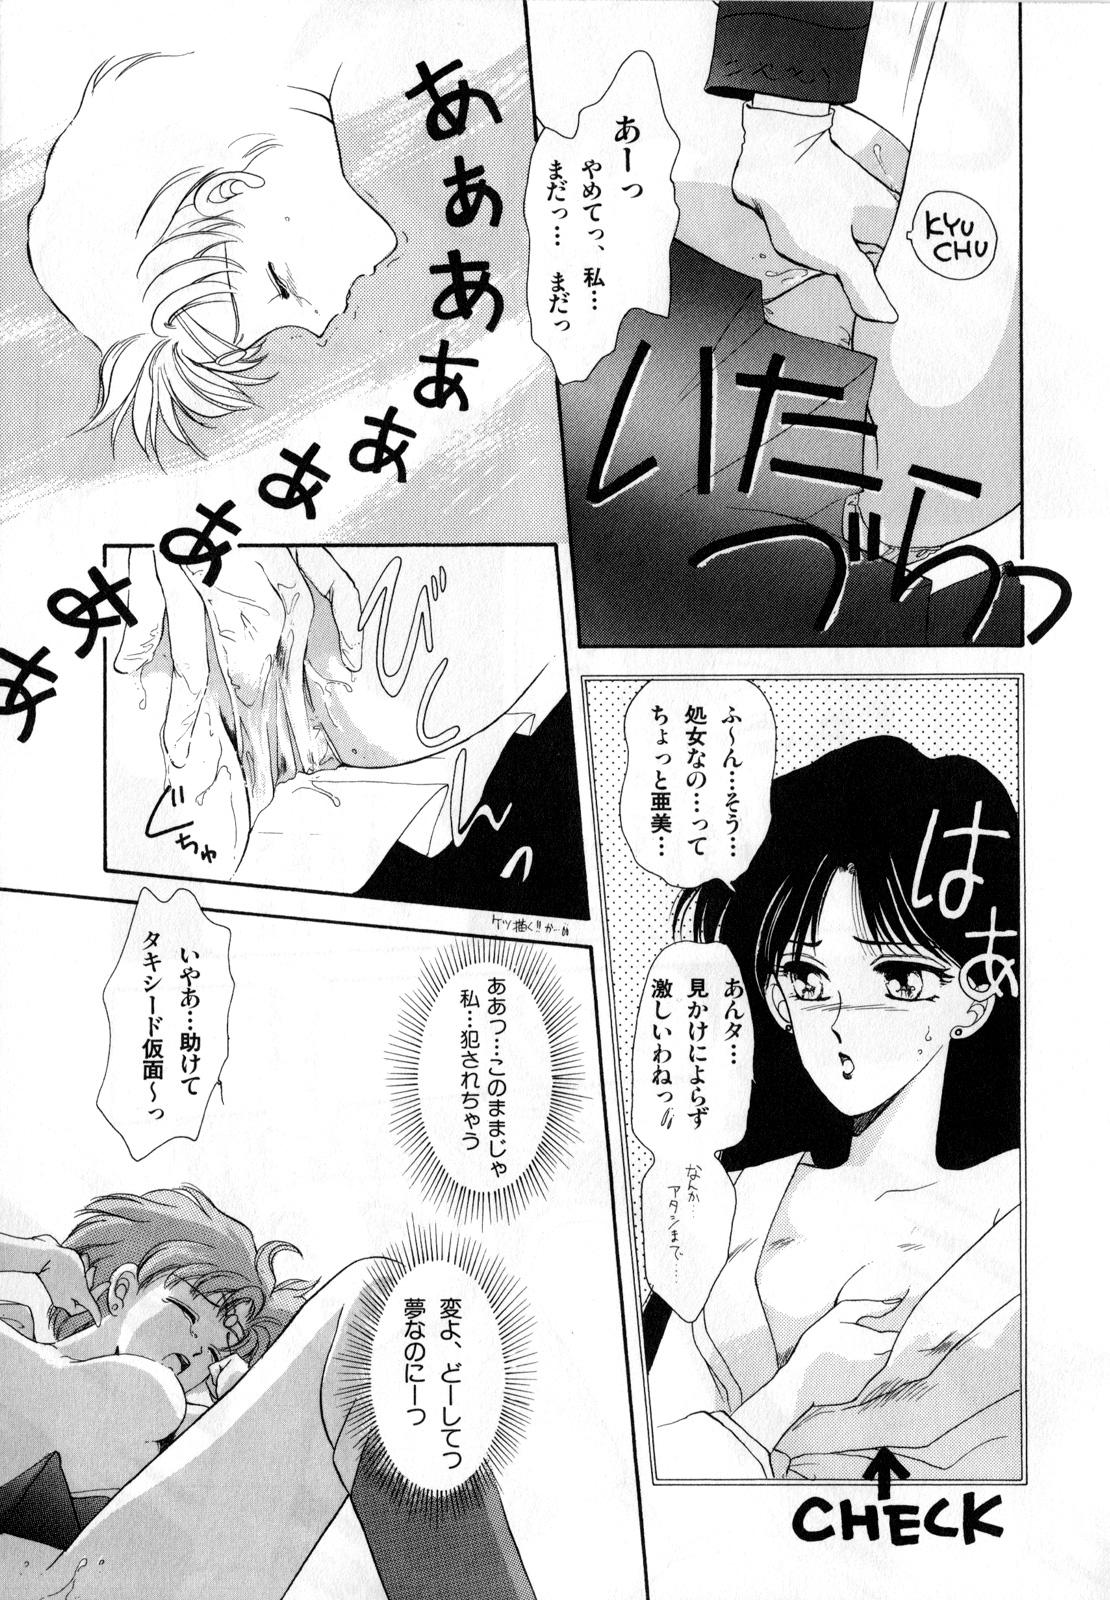 Homemade Lunatic Party 1 - Sailor moon Beautiful - Page 12